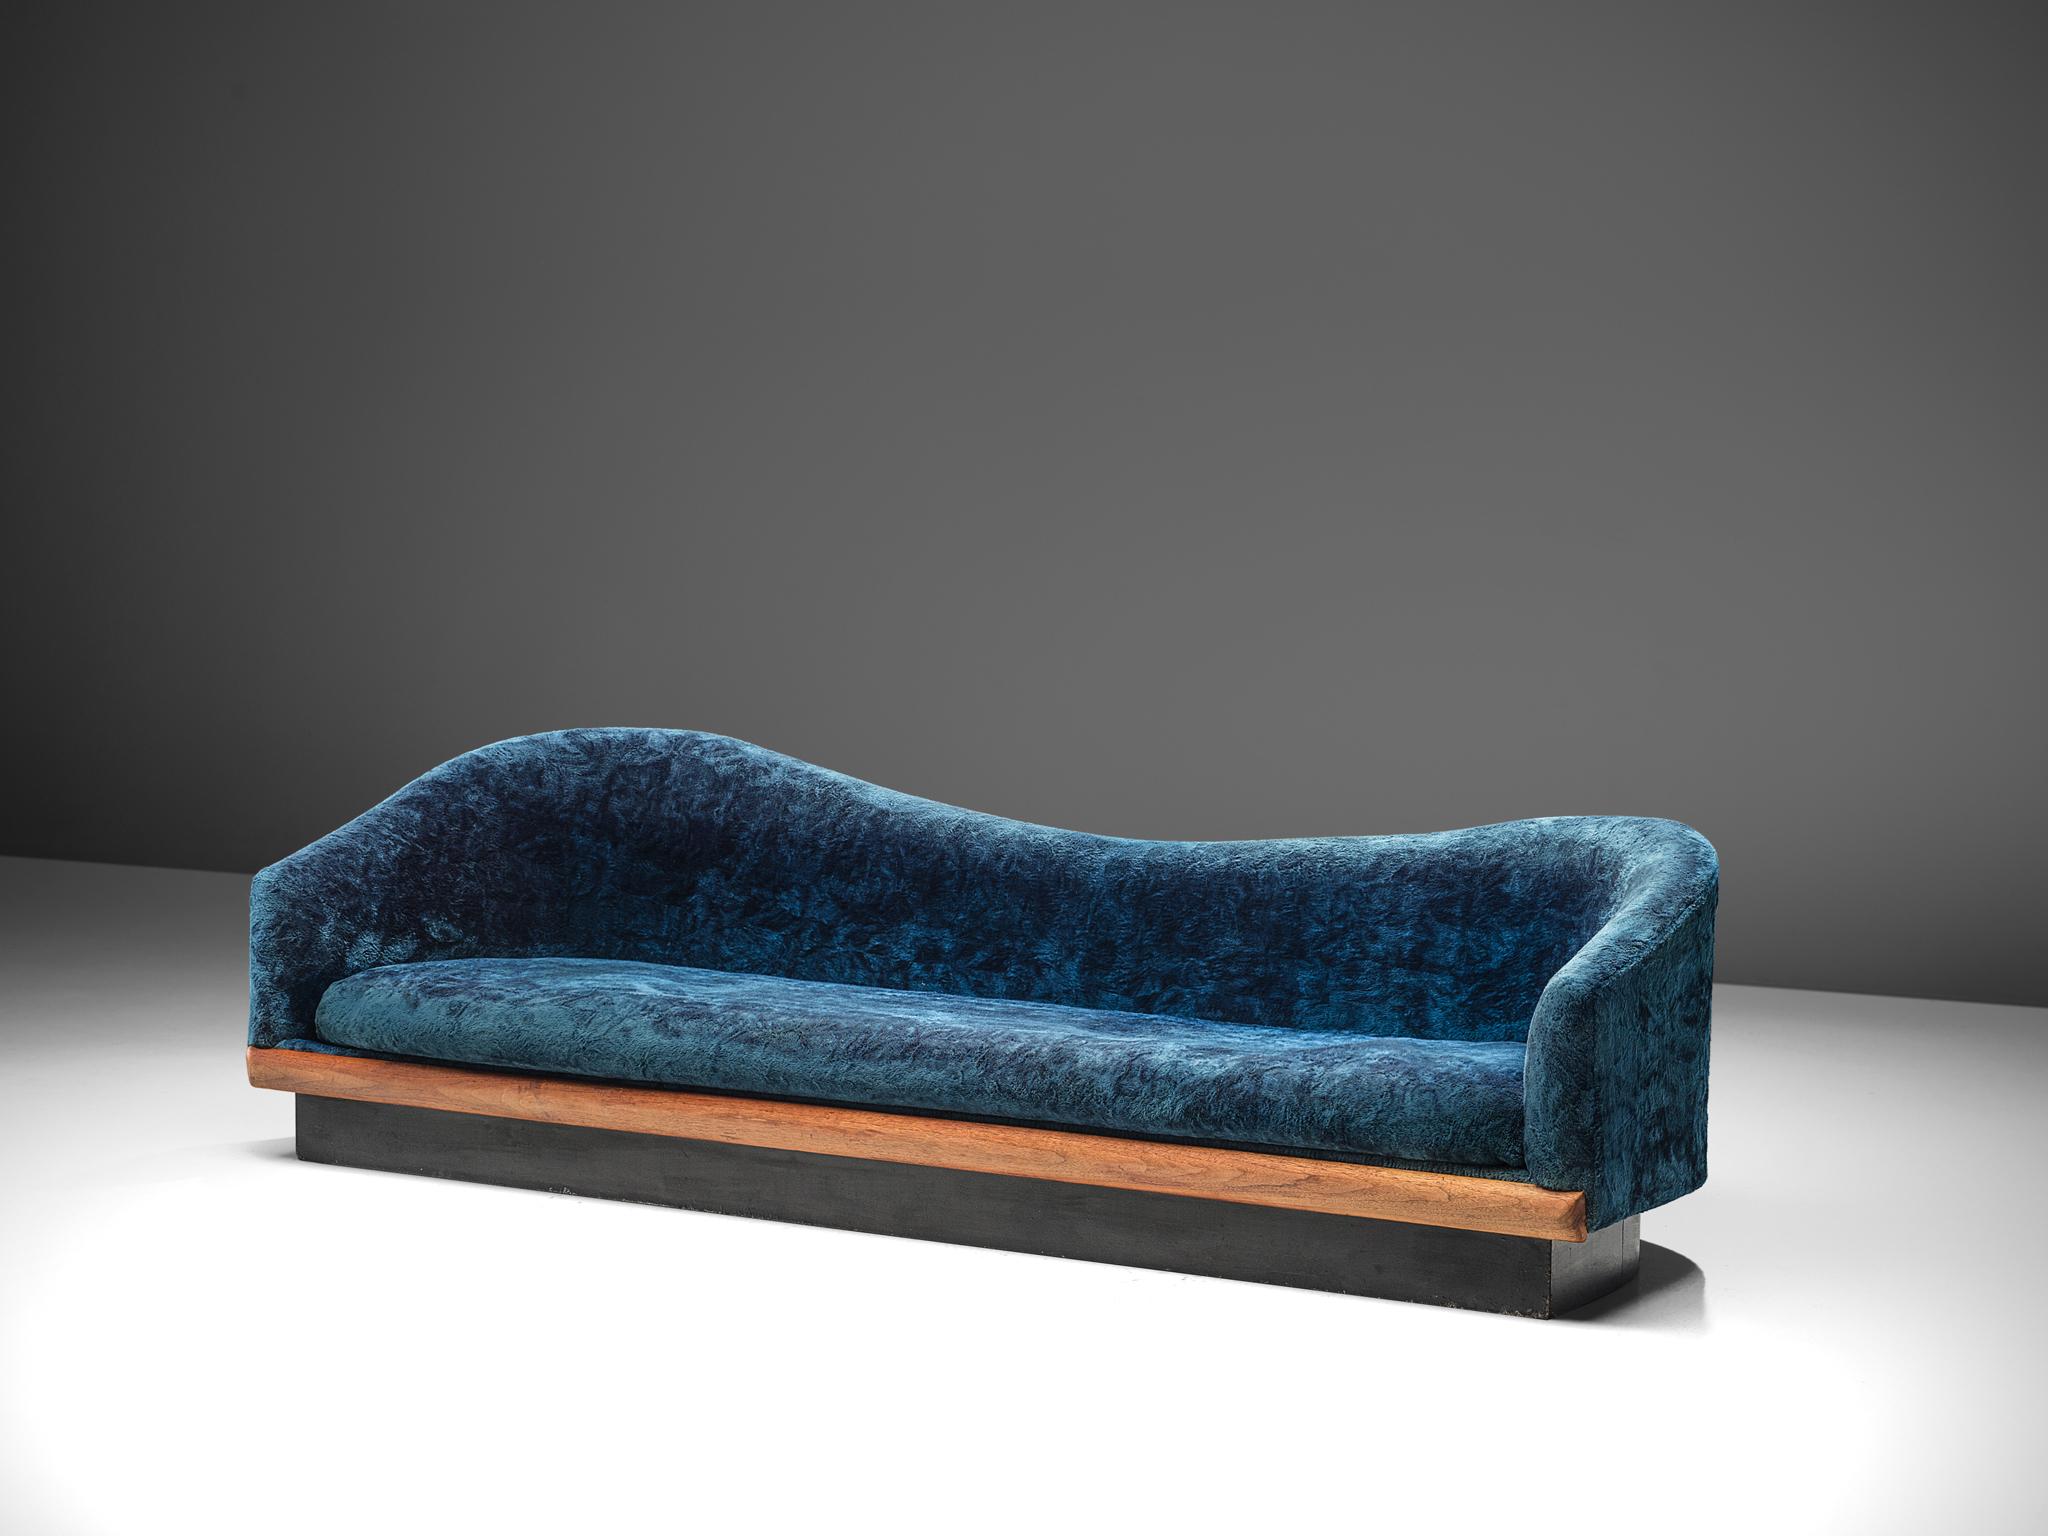 Adrian Pearsall, 'Cloud' sofa to be reupholstered, walnut and fabric, United States, 1970s

This cloud sofa has a modern shape, and sinuous lines which create a comfortable and appealing look. The a-symmetrical sofa is a great addition to a living